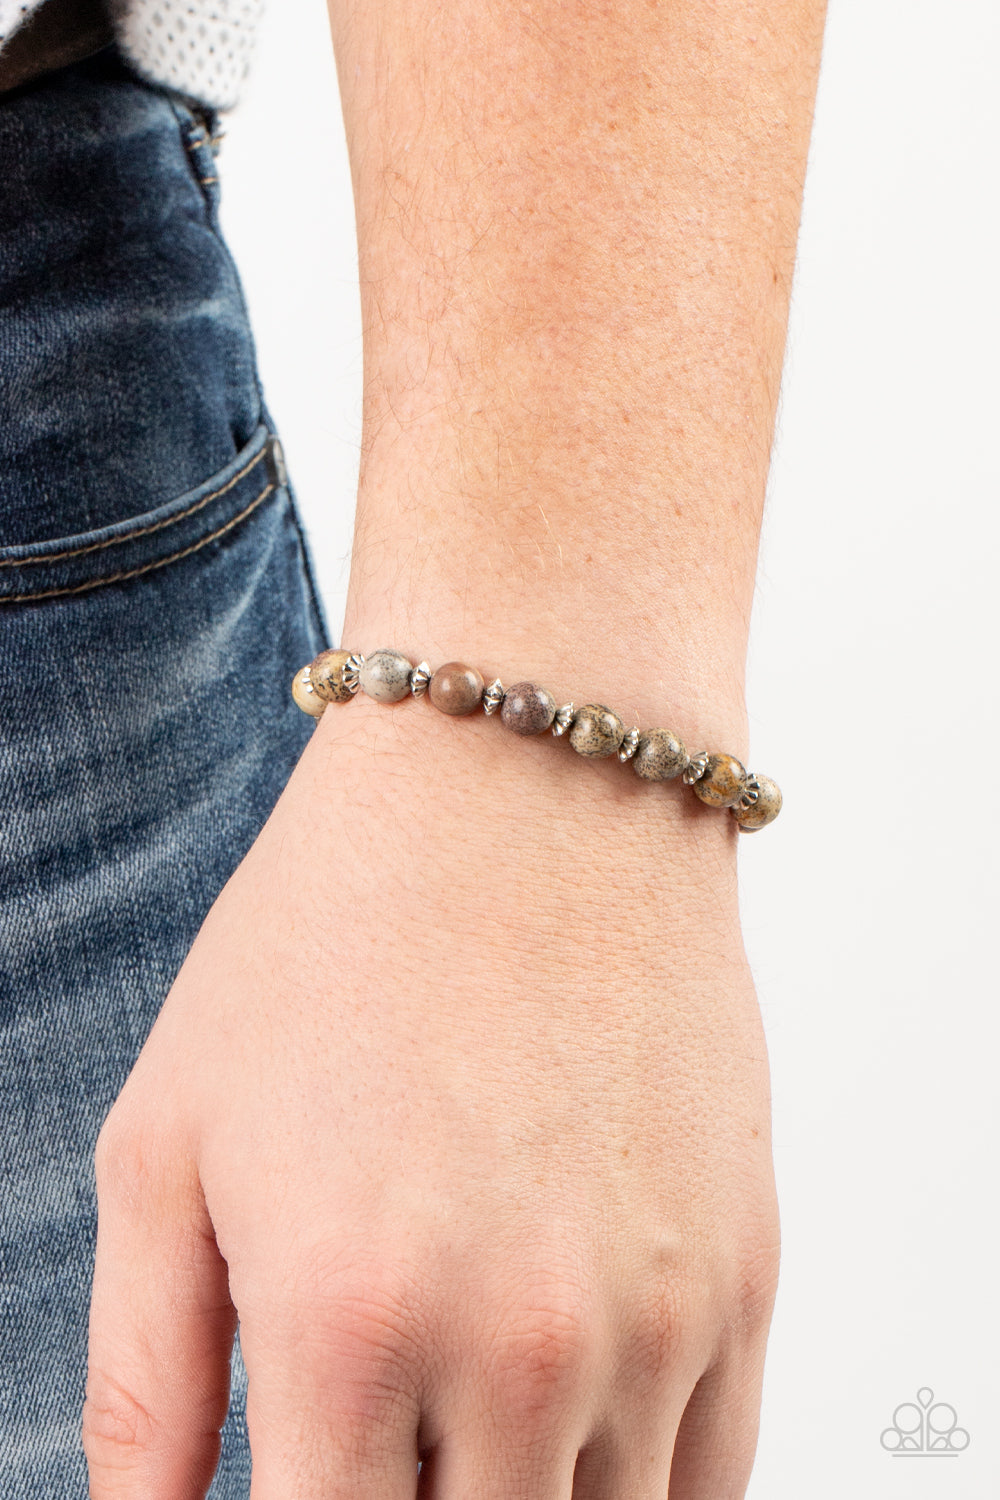 Keep the Peace - Silver Natural Stone Bracelets infused with silver accents, an earthy collection of natural stones are threaded along a stretchy band around the wrist for a tranquil look.  Sold as one individual bracelet.